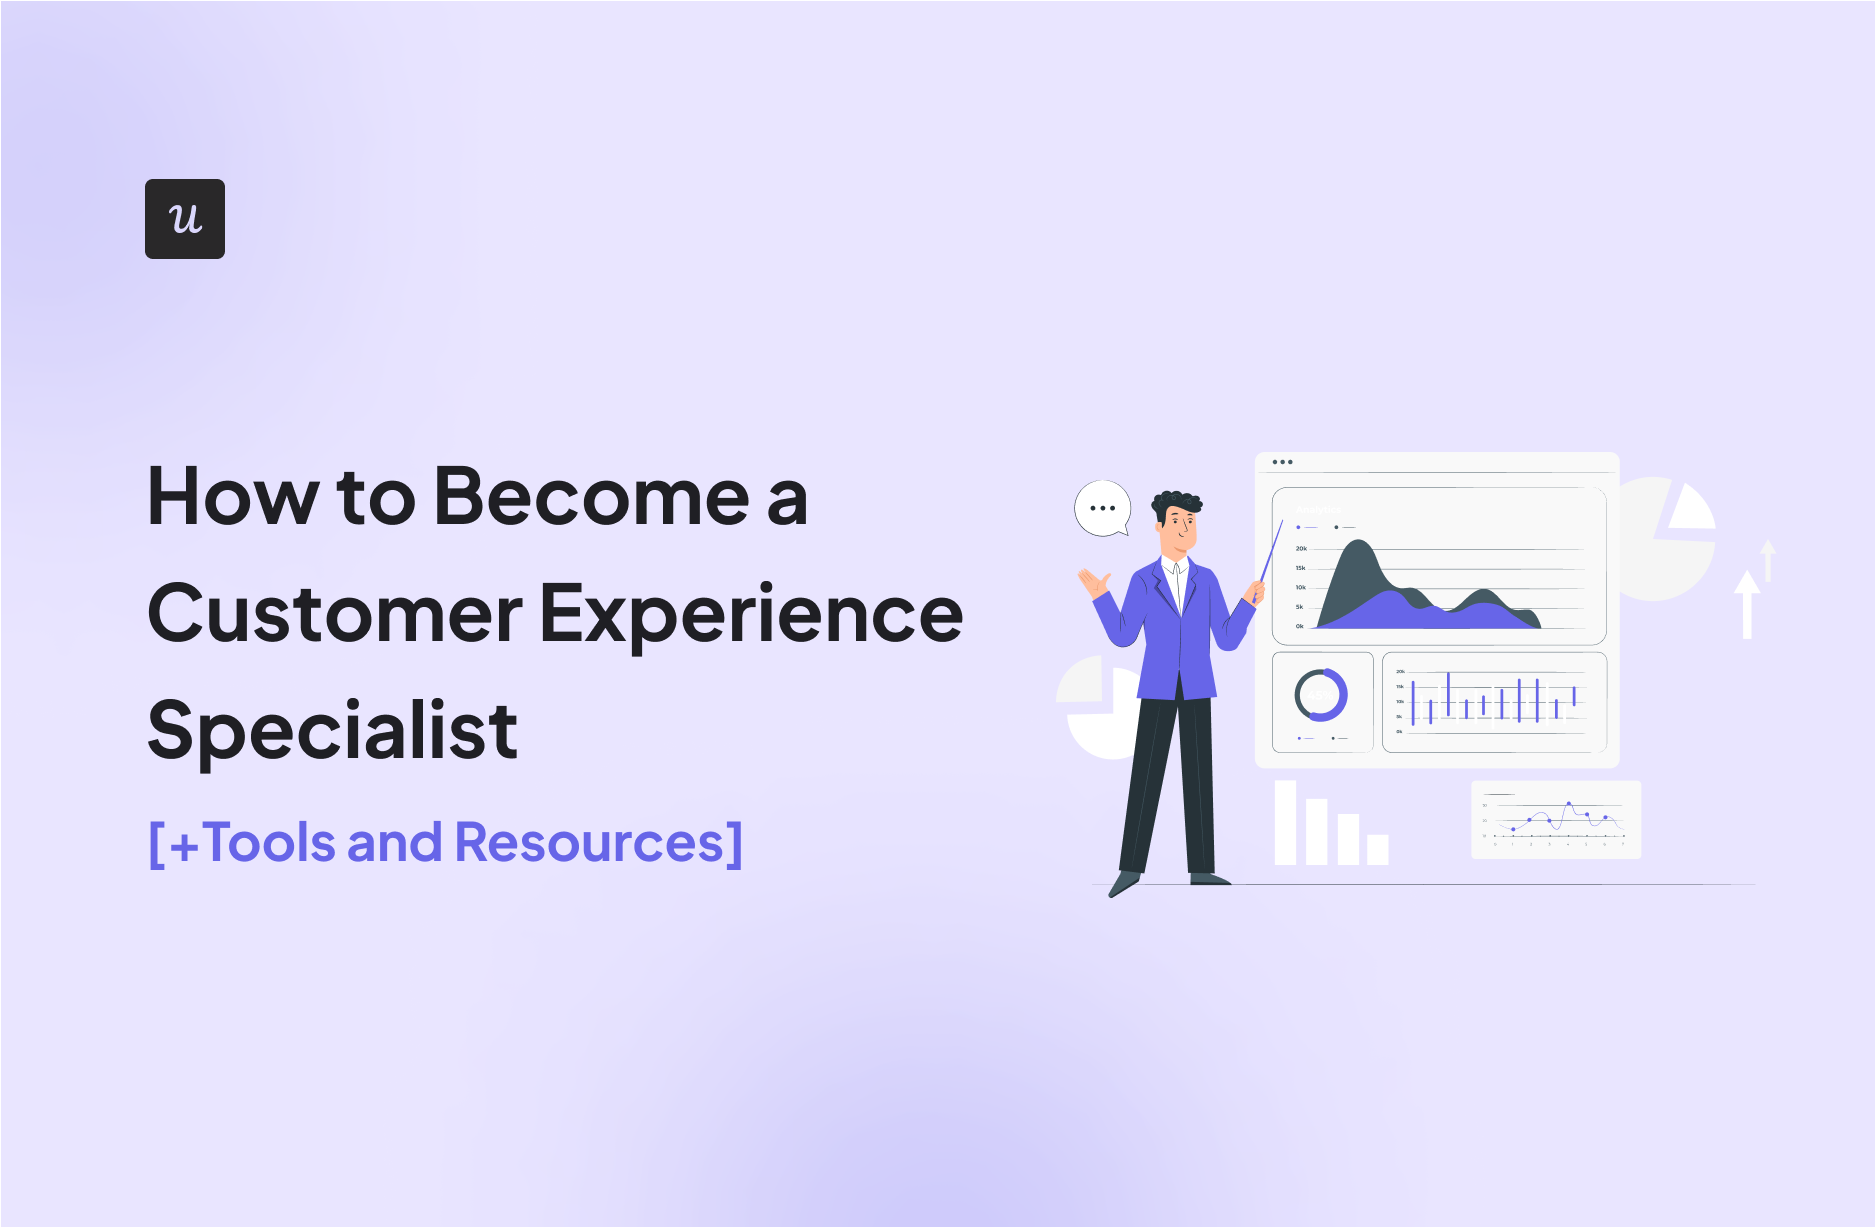 How to Become a Customer Experience Specialist [+Tools and Resources]